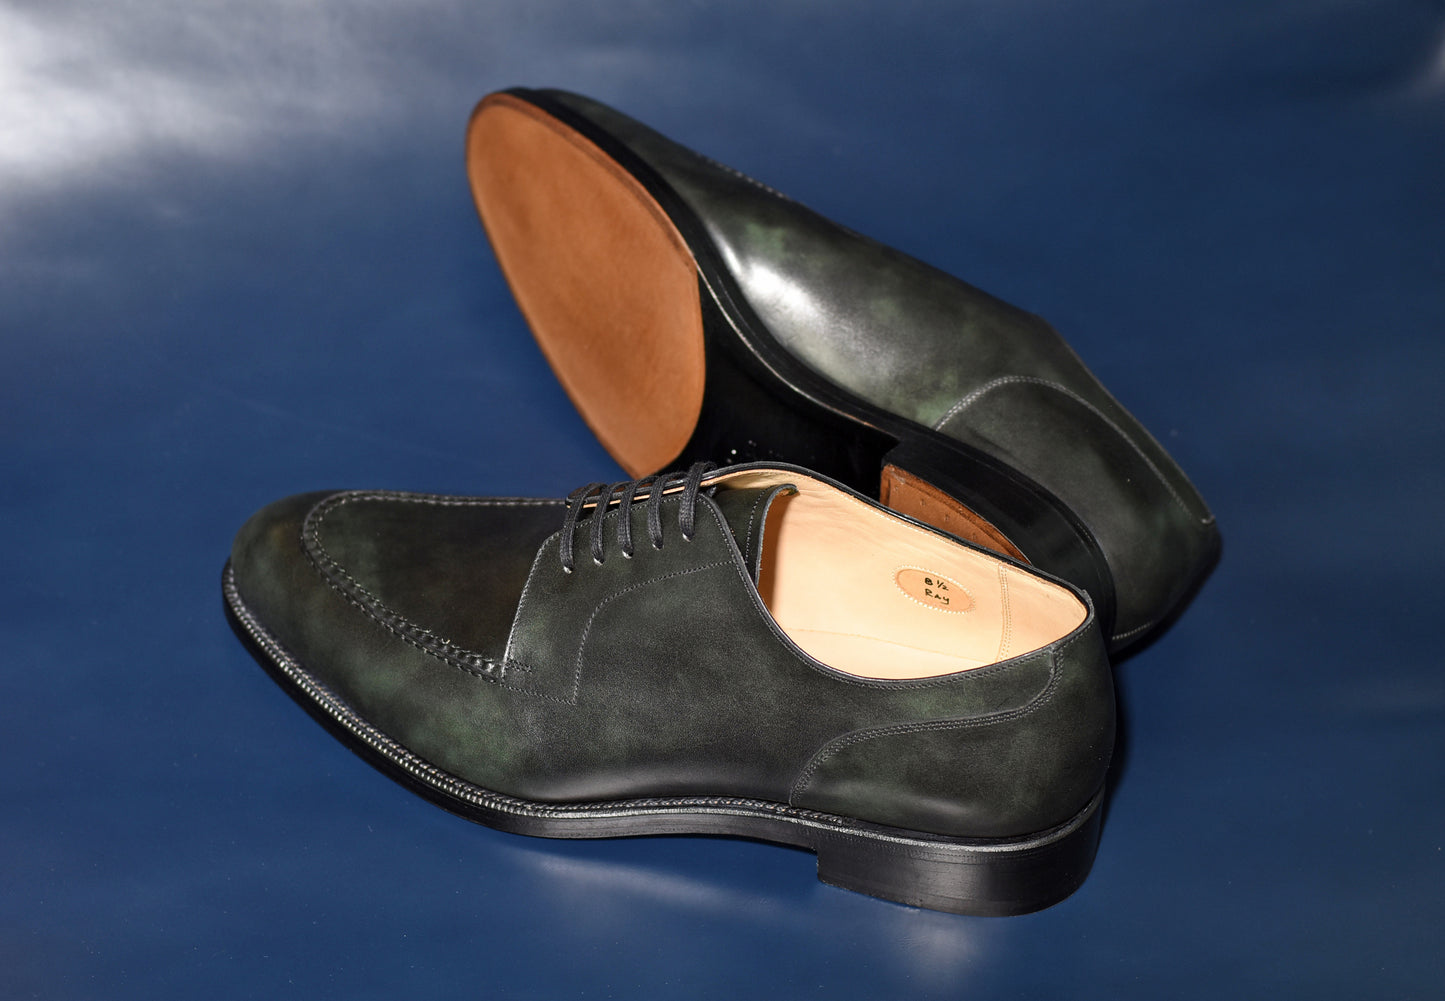 ★London Super Trunk Show 2023 Anniversary Model★ “Ray” Pie Crust Apron Derby, Dark Green Dress Shoes, Zonta Museum Calf, Goodyear welted, US size 5 1/2 ~ 11